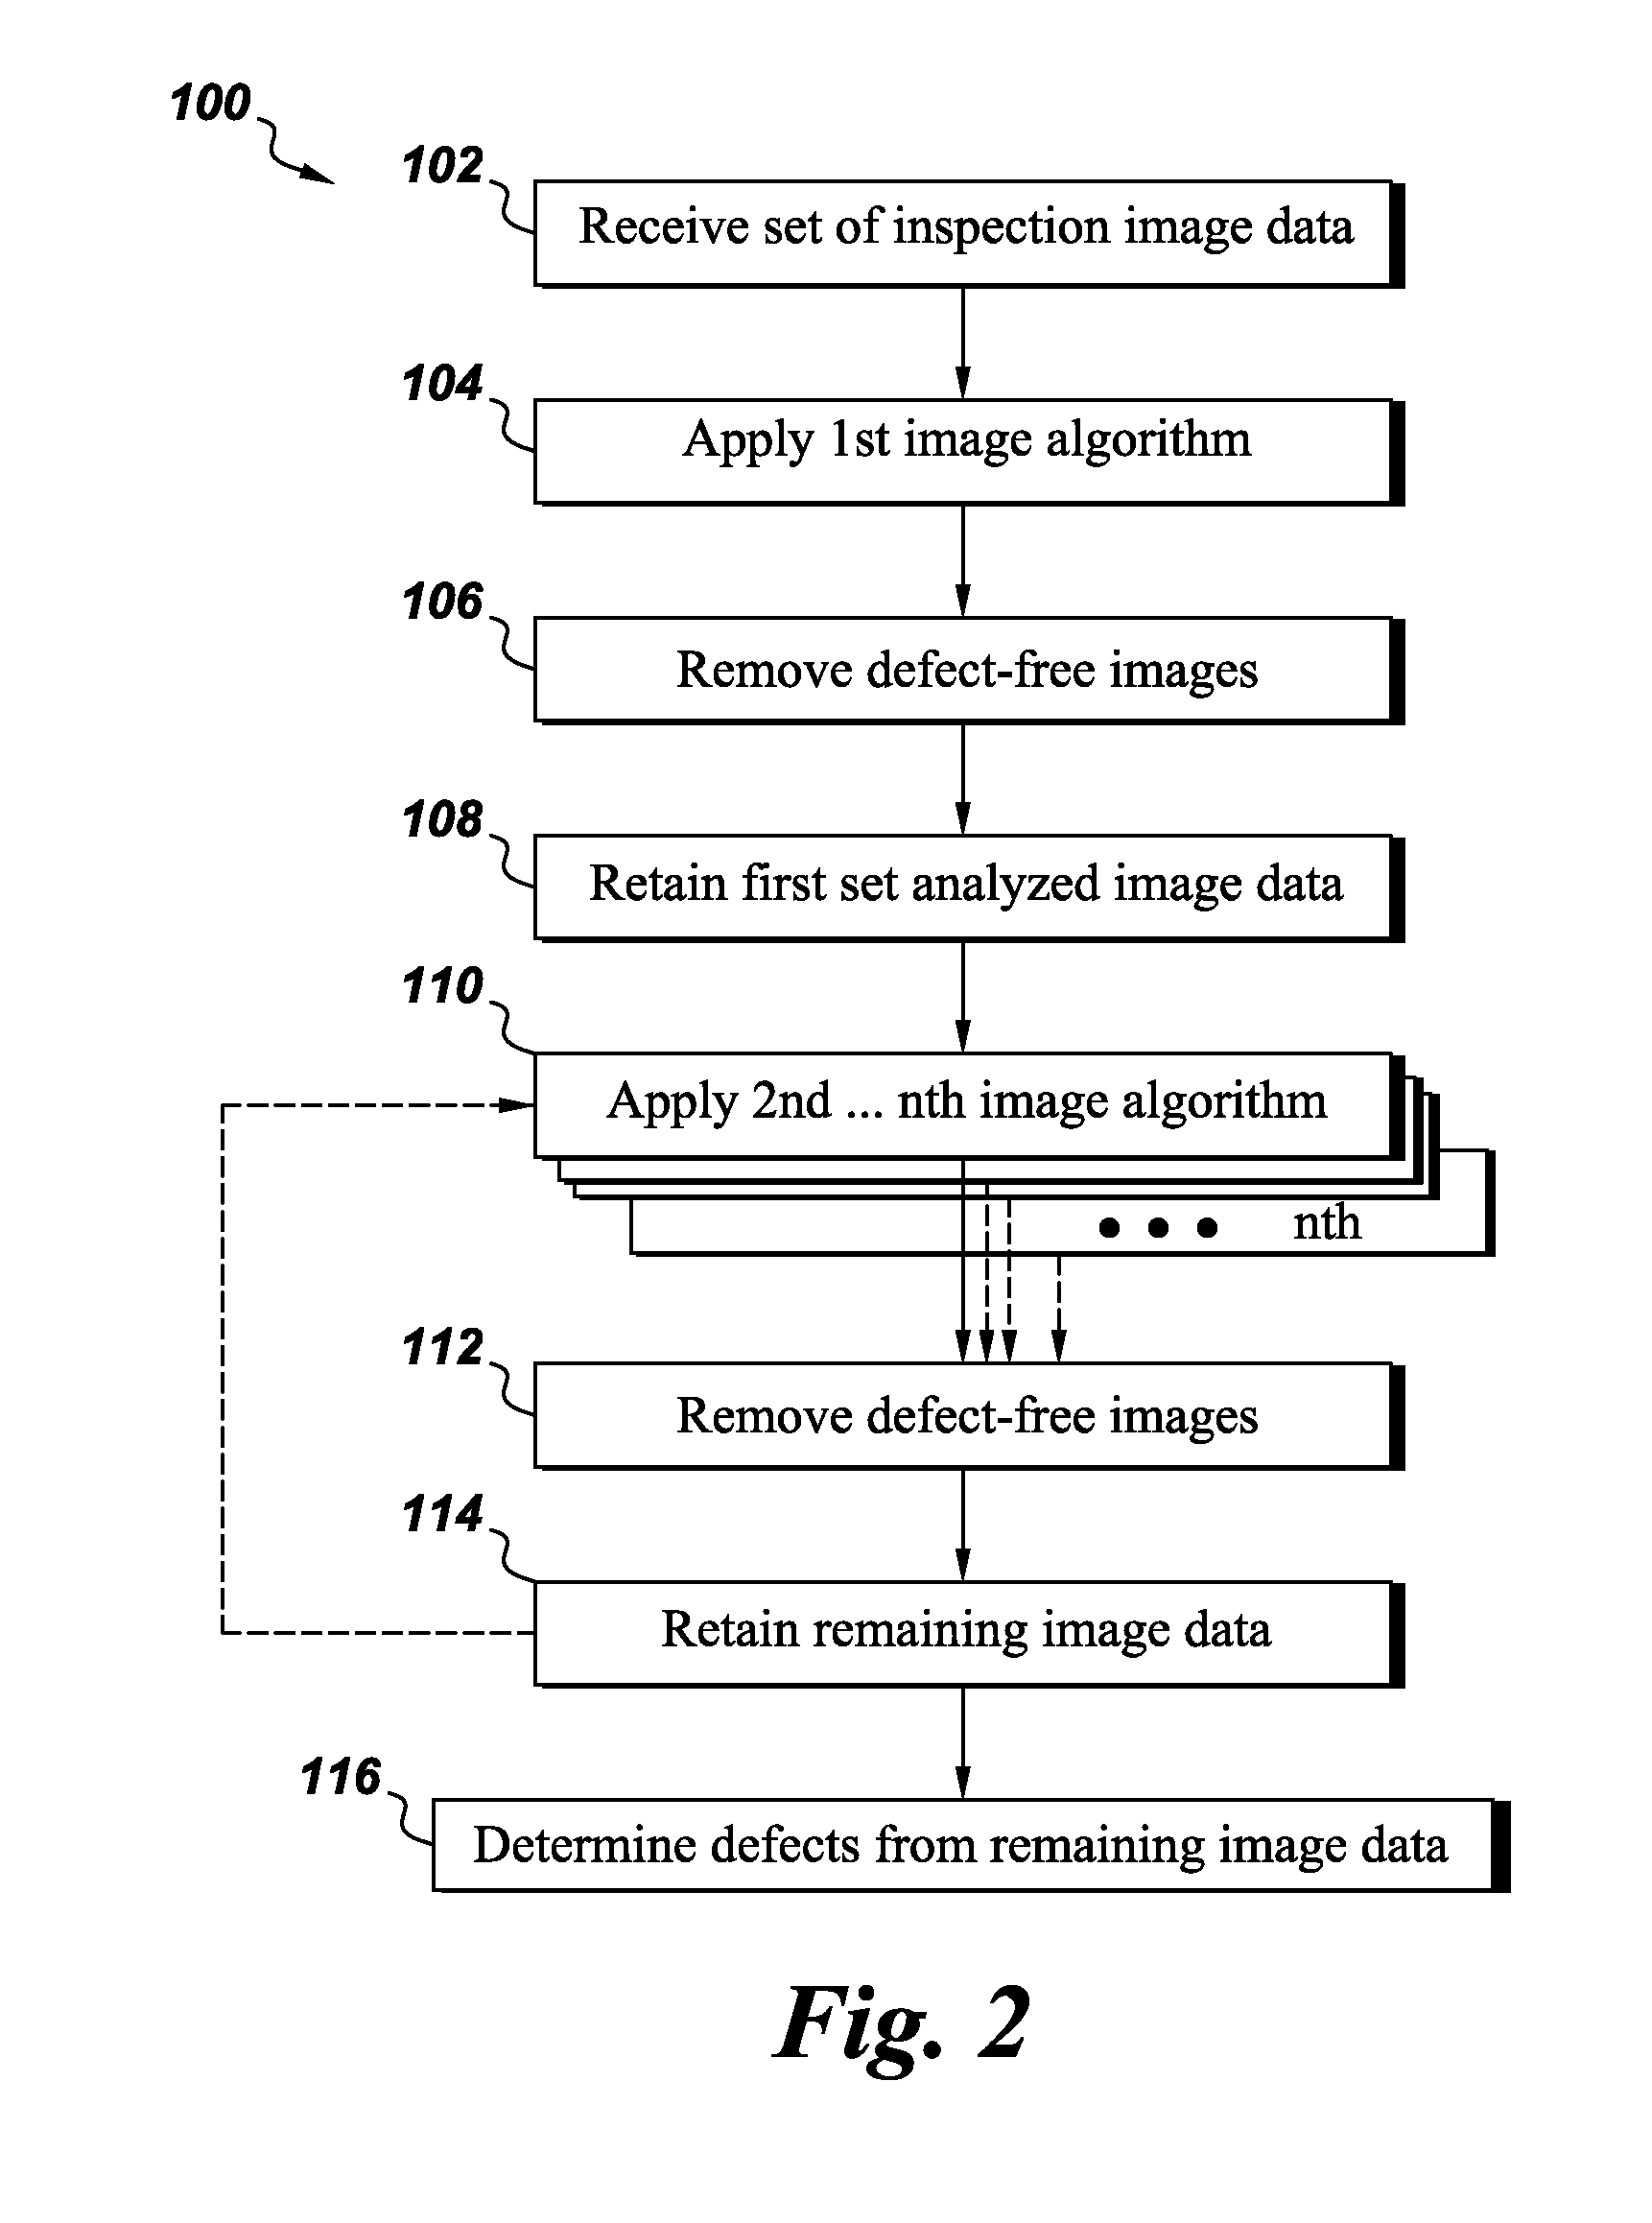 Sequential approach for automatic defect recognition